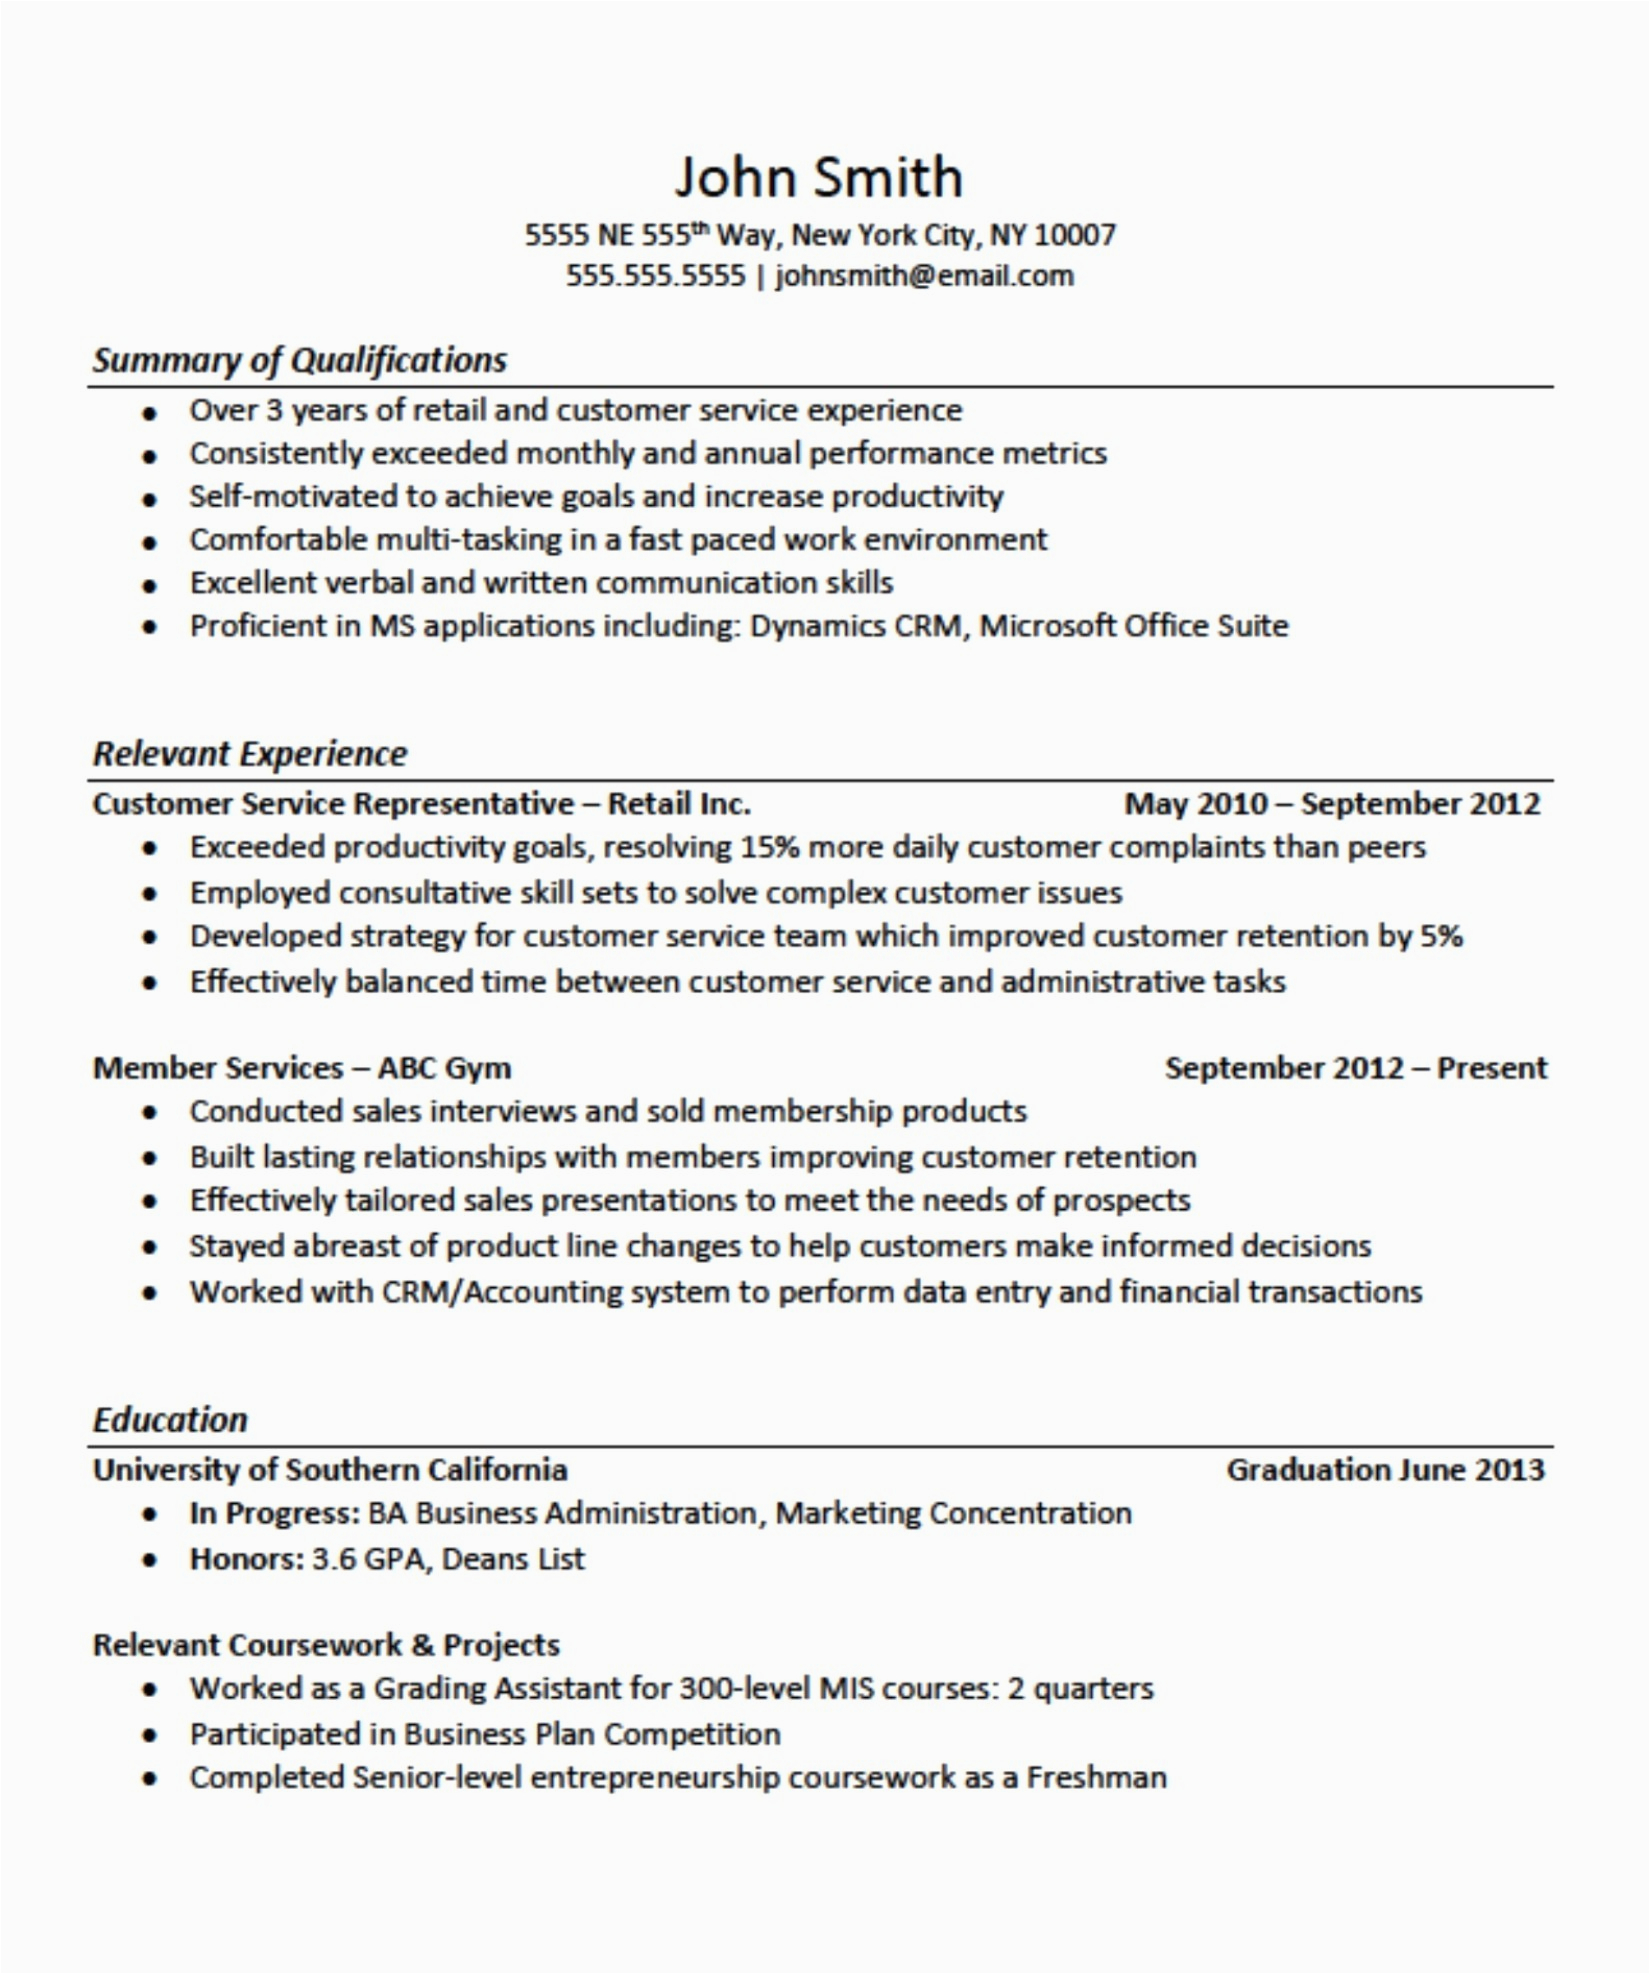 Professional Summary for Resume No Work Experience Sample 12 Retail Resume Examples No Experience Radaircars